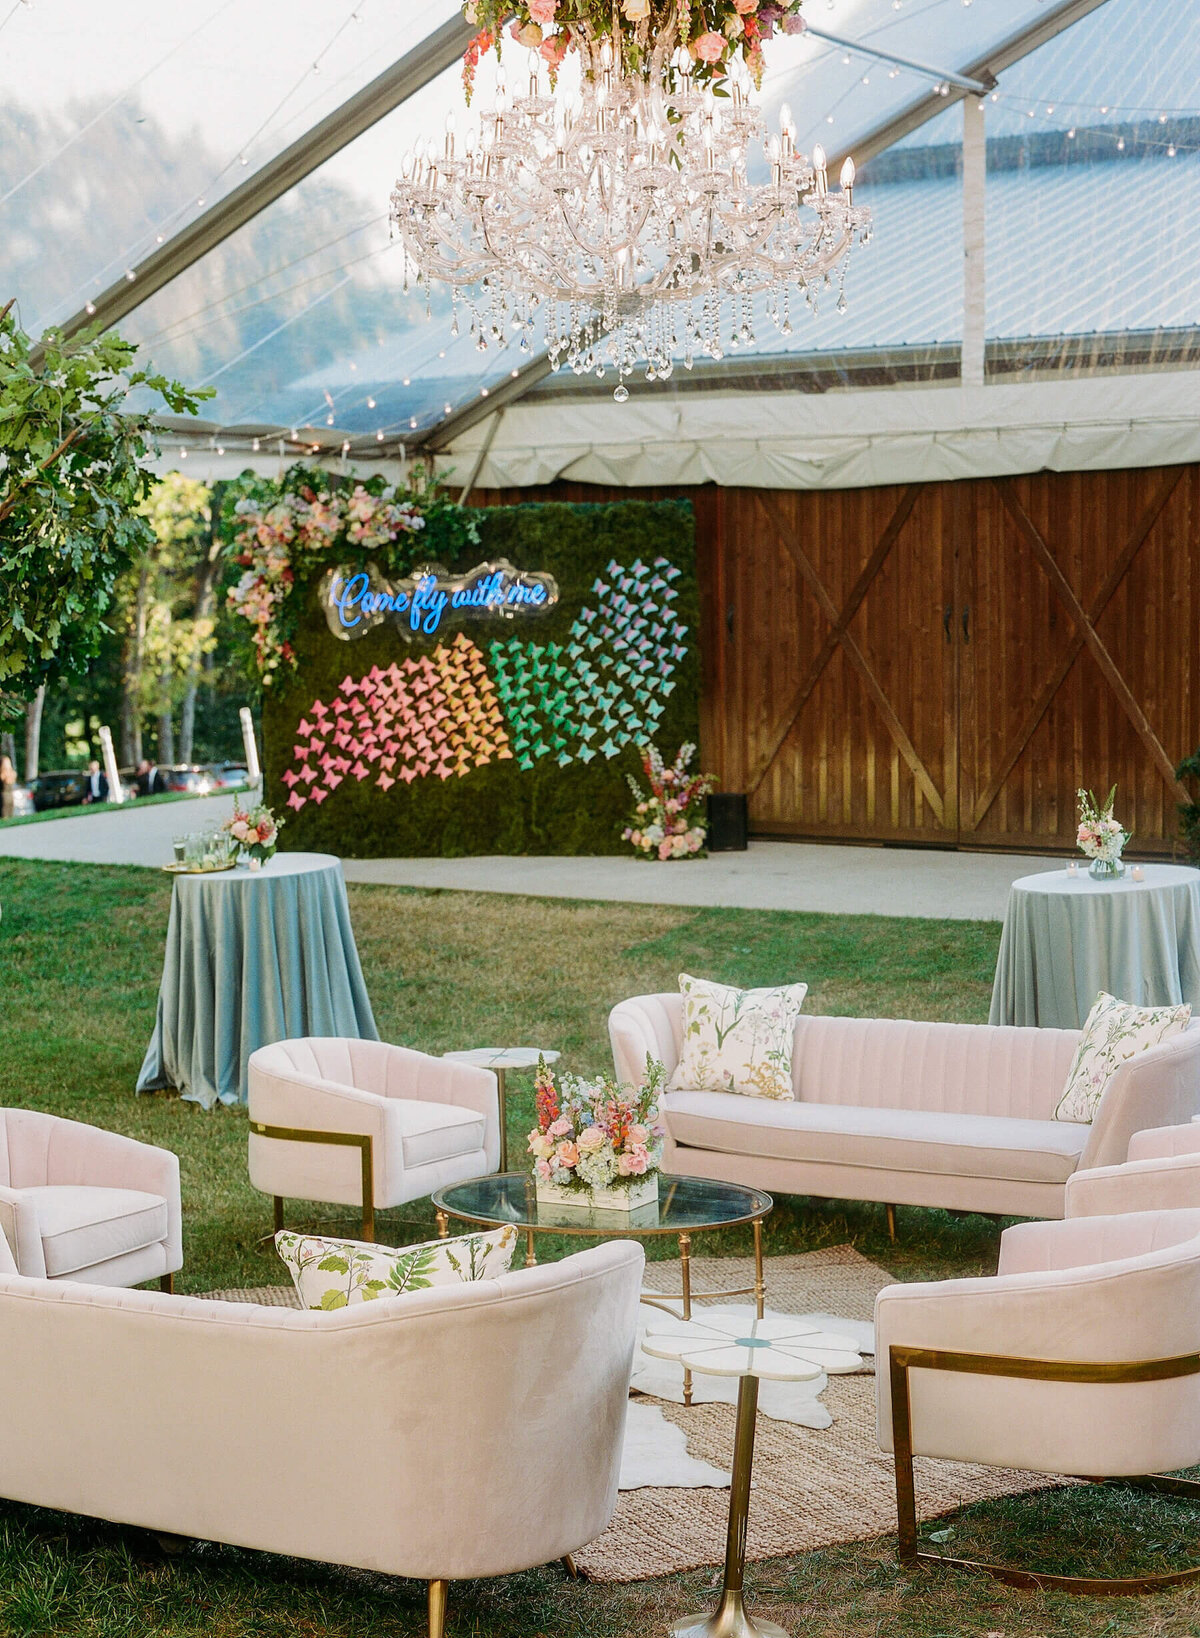 Wedding cocktail hour under a tent with pink sofas and velvet blue linens.